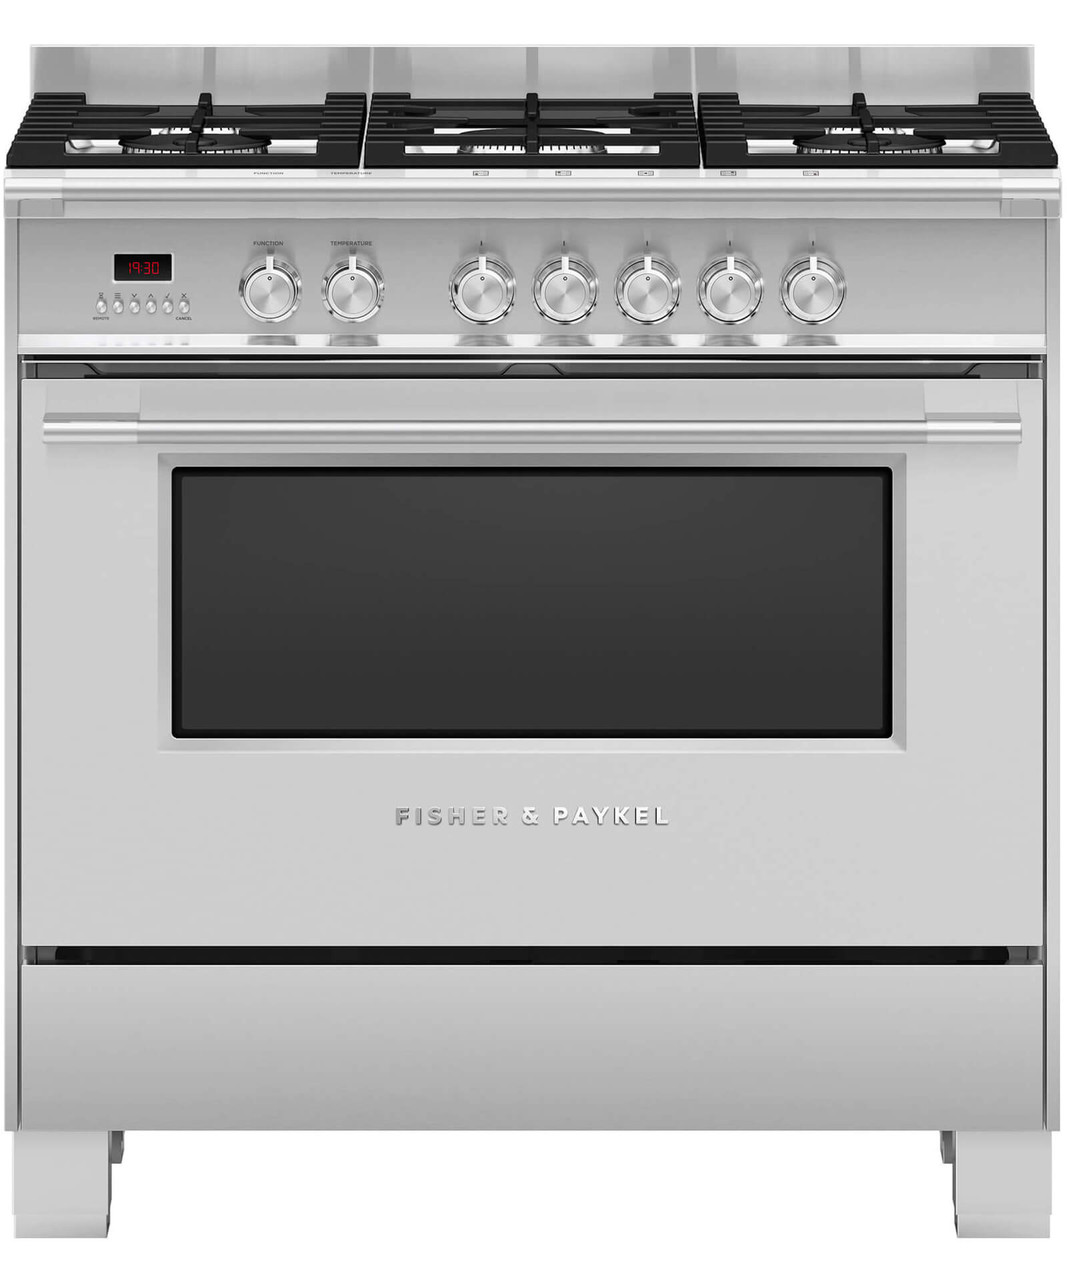 OR90SCG2X1 - 90cm Classic Style Freestanding Cooker - Stainless Steel